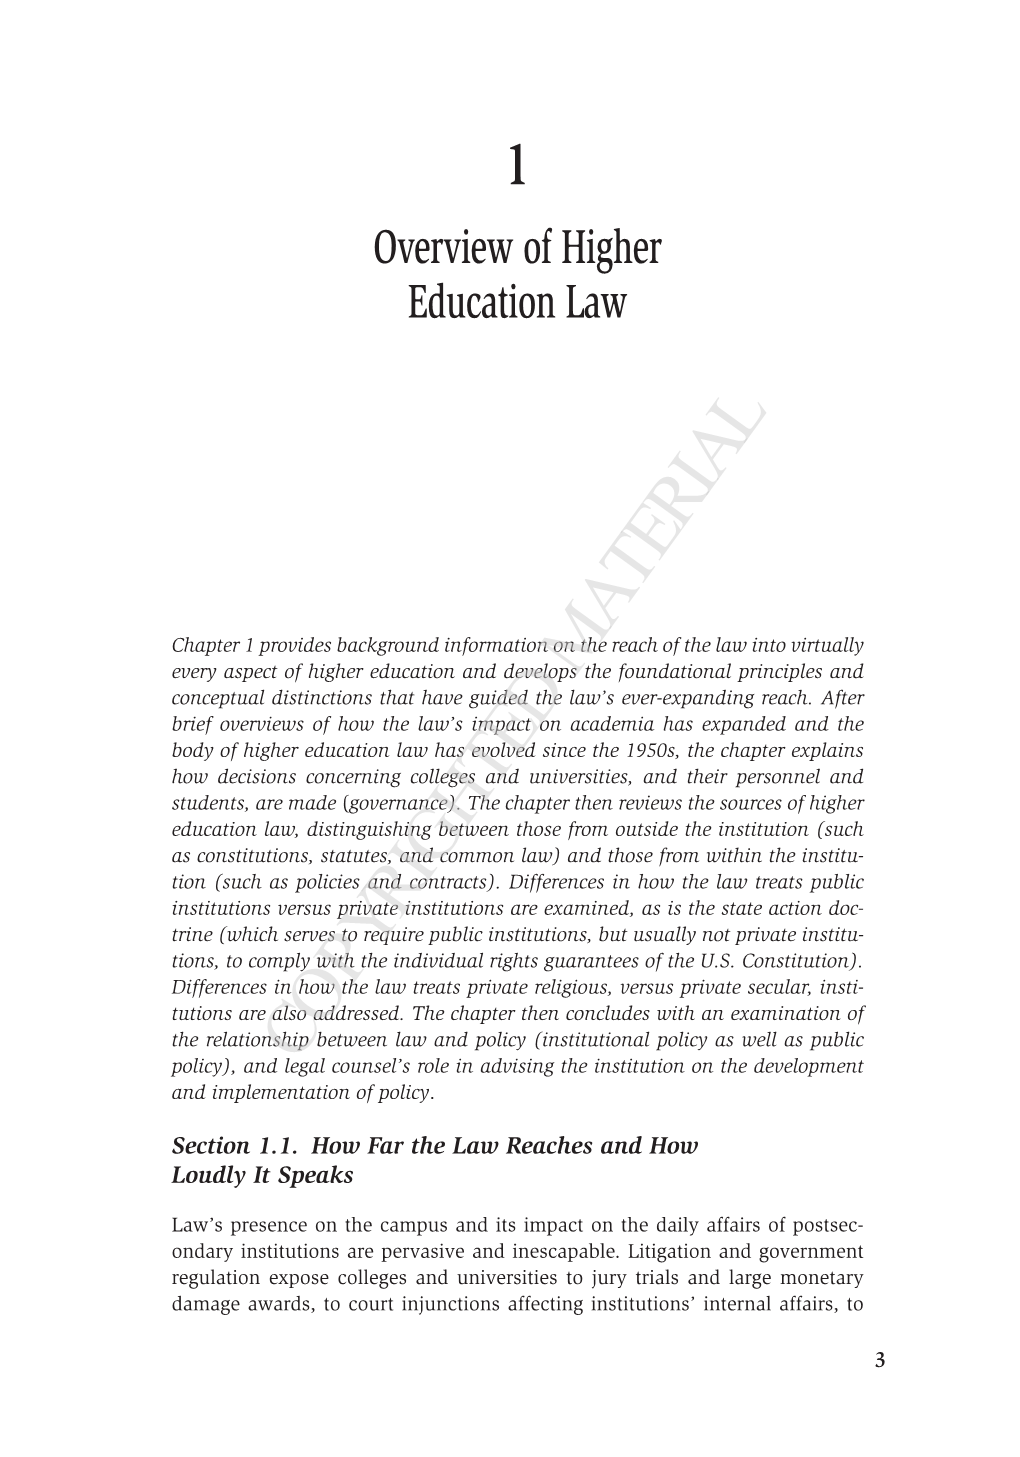 Chapter 1: Overview of Higher Education Law: Student Version